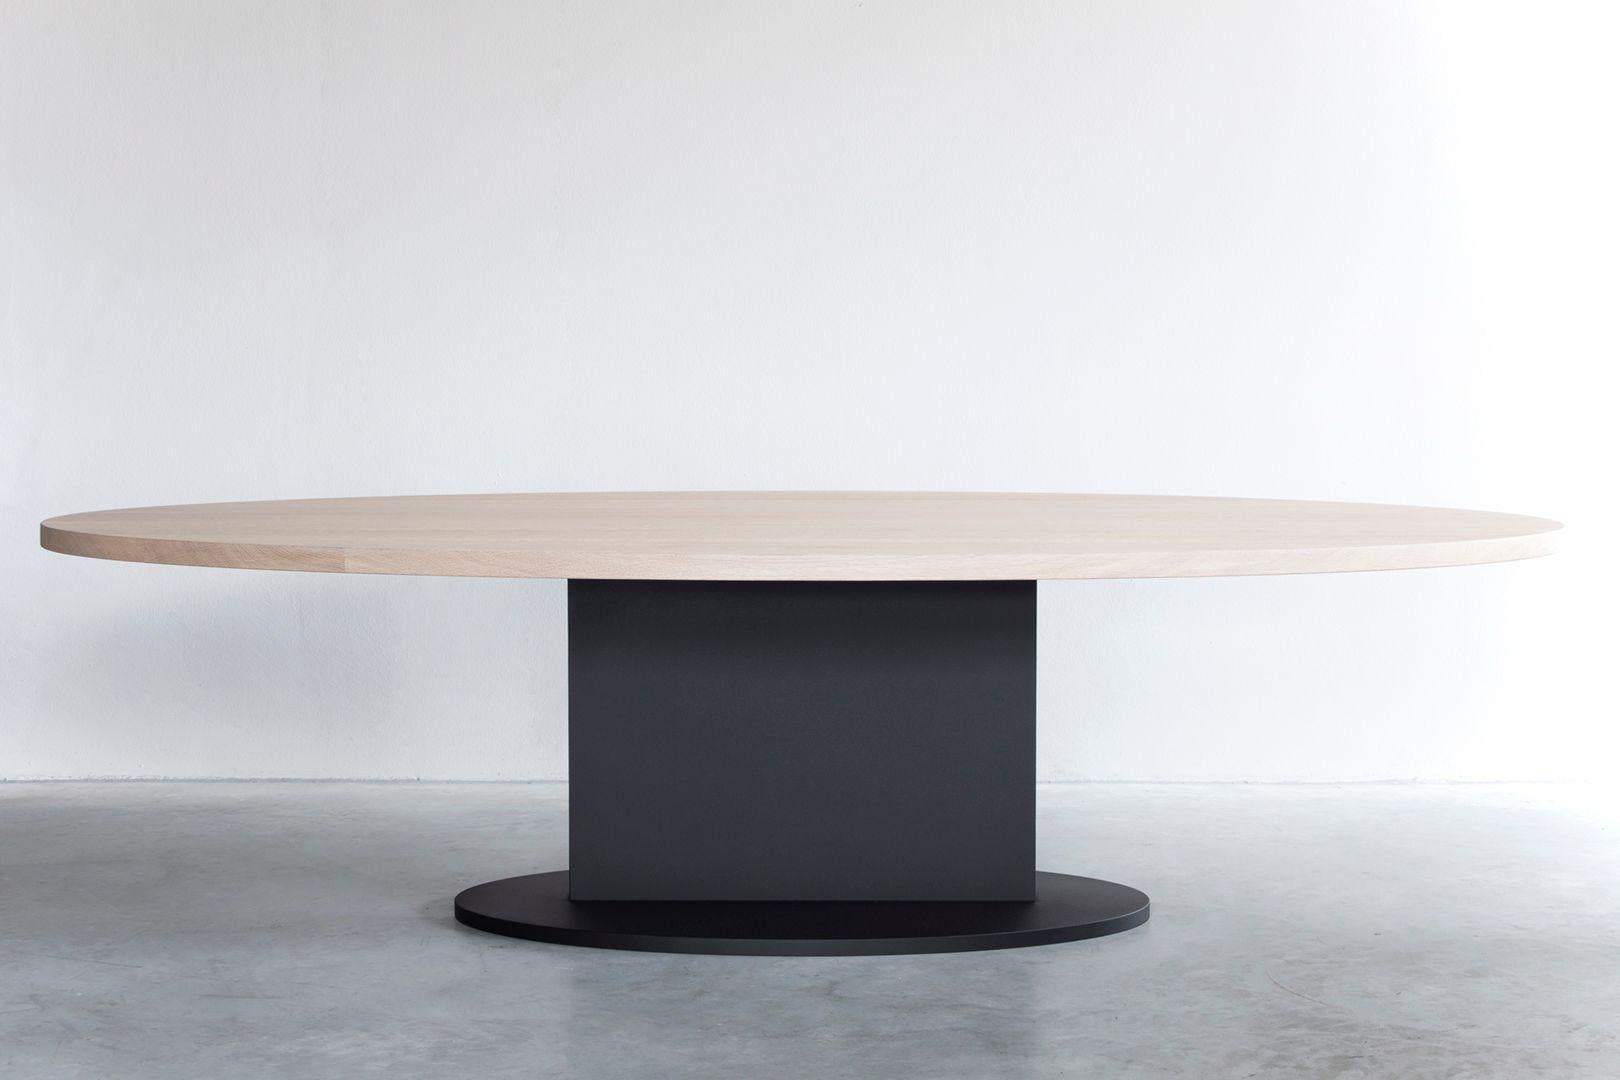 Opium oval table with steel base by Van Rossum
Dimensions: D240 x W120 x H75 cm
Materials: Oak, steel.
Also available with brass details.

The wood is available in all standard Van Rossum colors, or in a matching finish to customer’s own